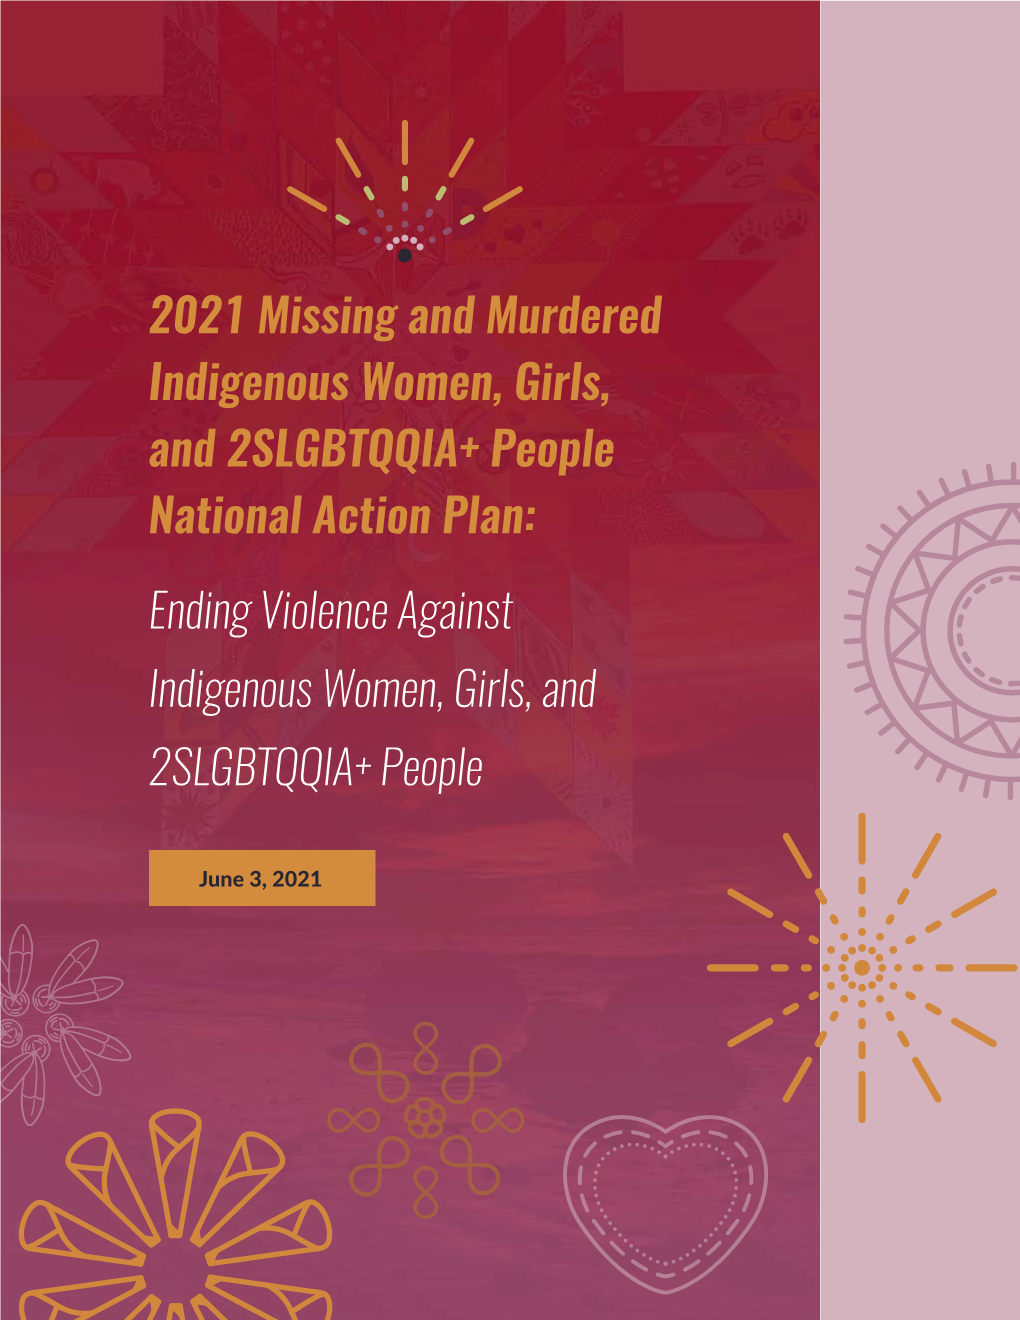 National Action Plan: Ending Violence Against Indigenous Women, Girls, and 2SLGBTQQIA+ People